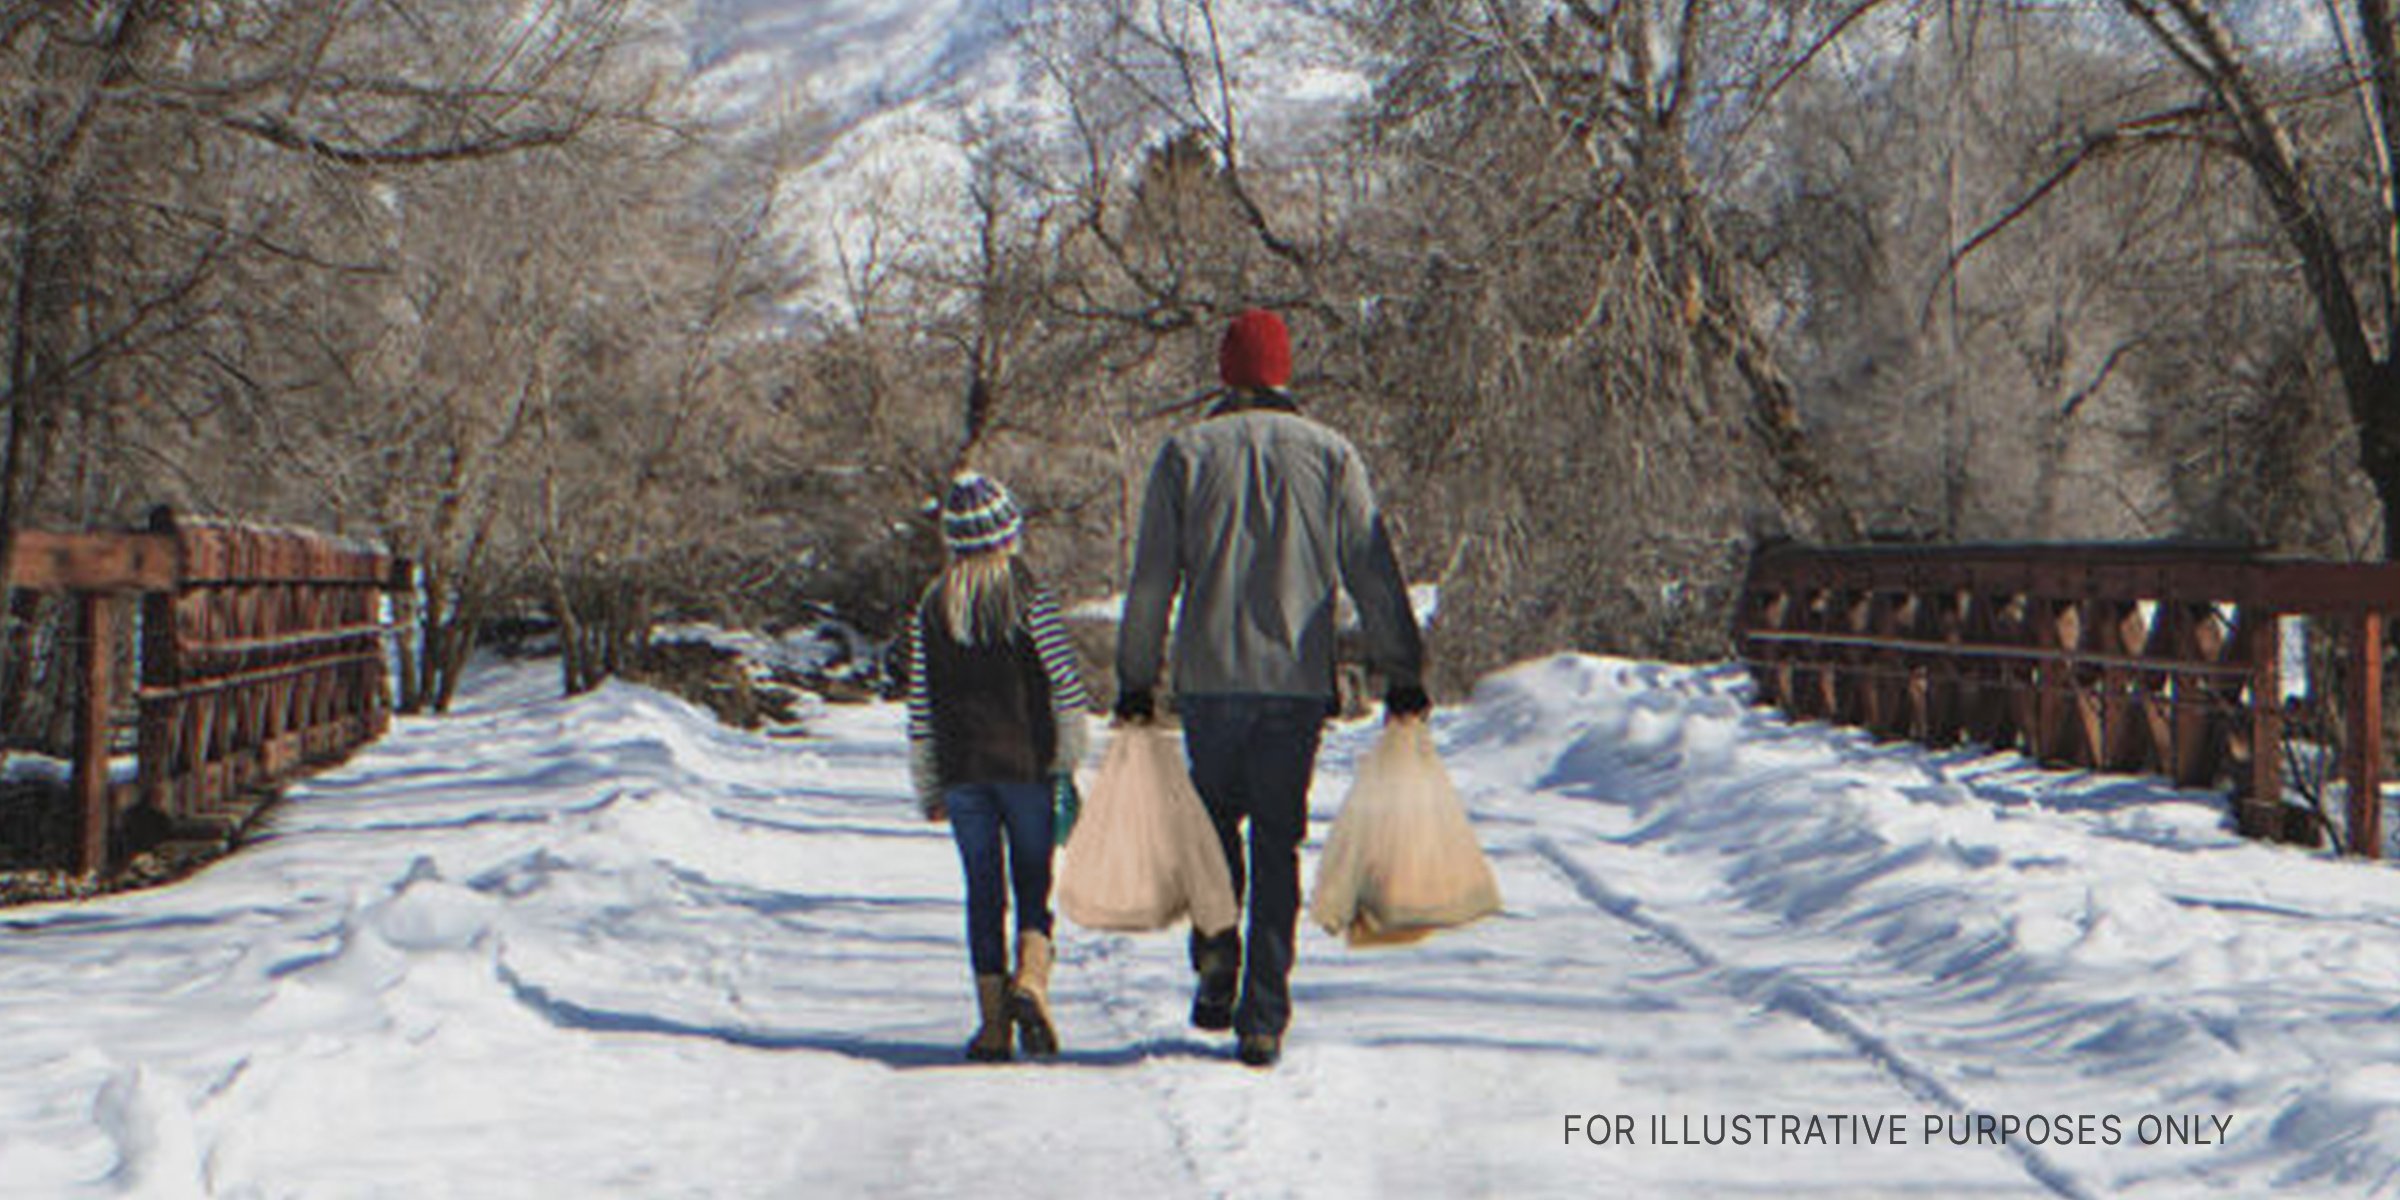 Man and child walking with groceries | Source: Getty Images | Shutterstock